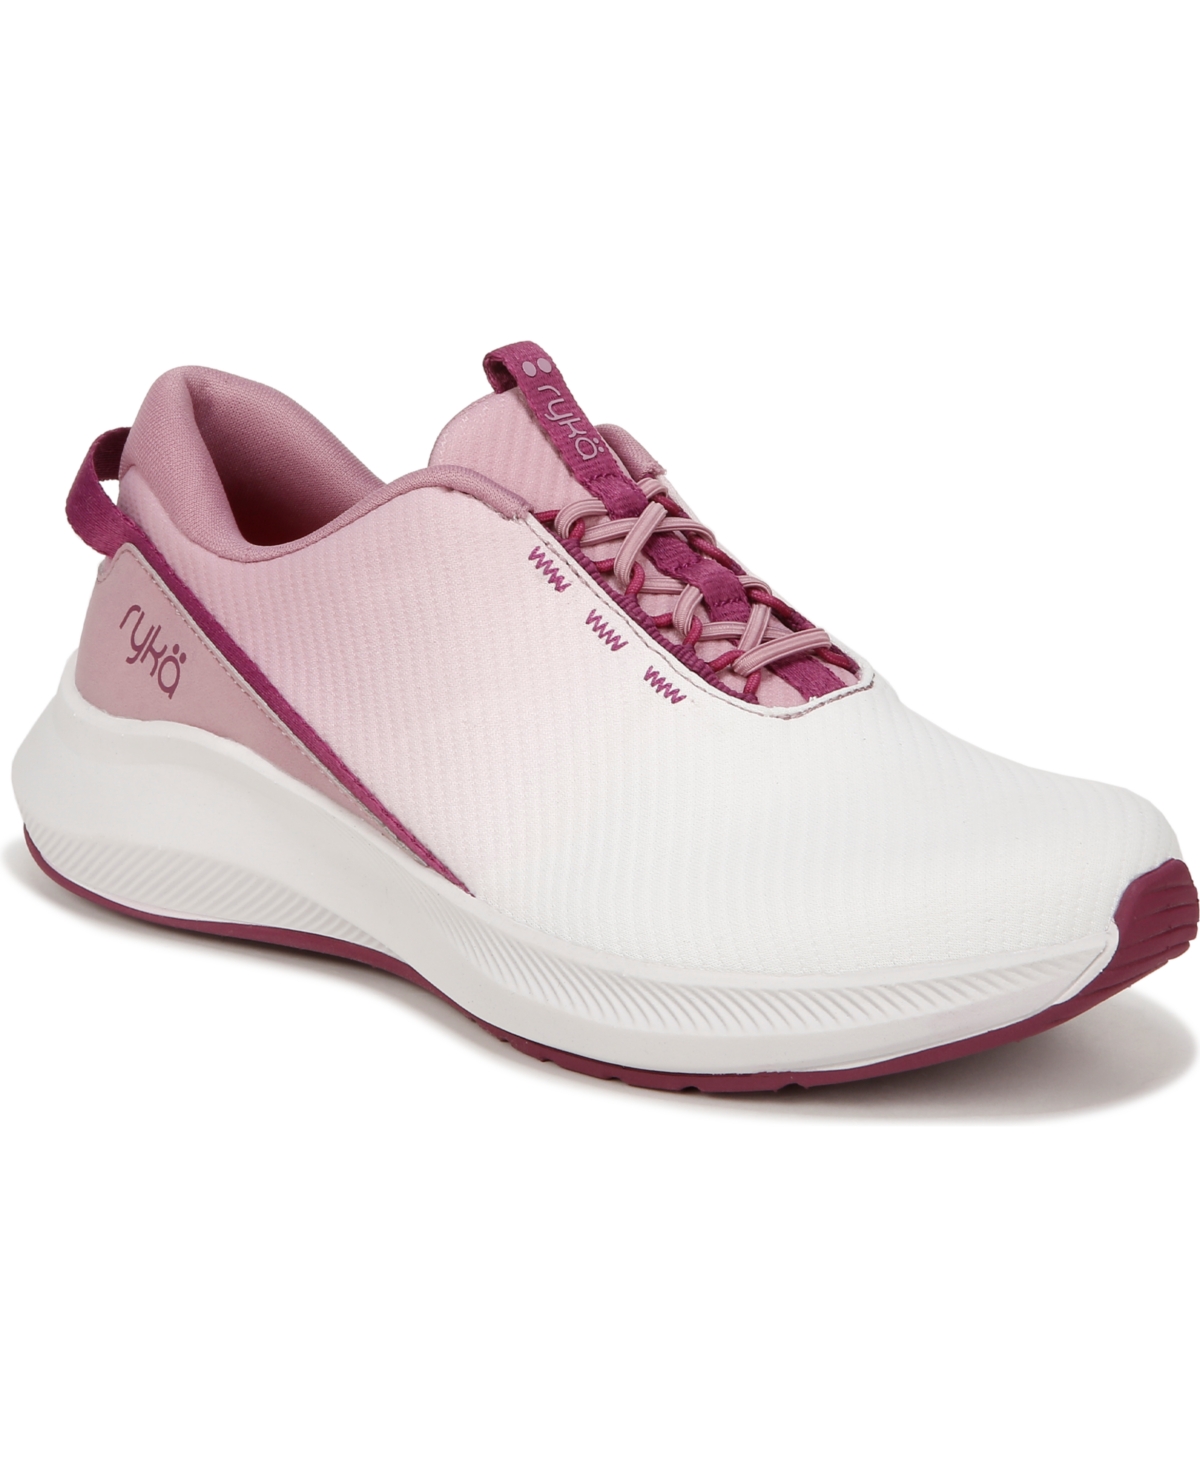 Ryka Women's Finesse Sneakers In Vintage Rose Stretch Knit Fabric